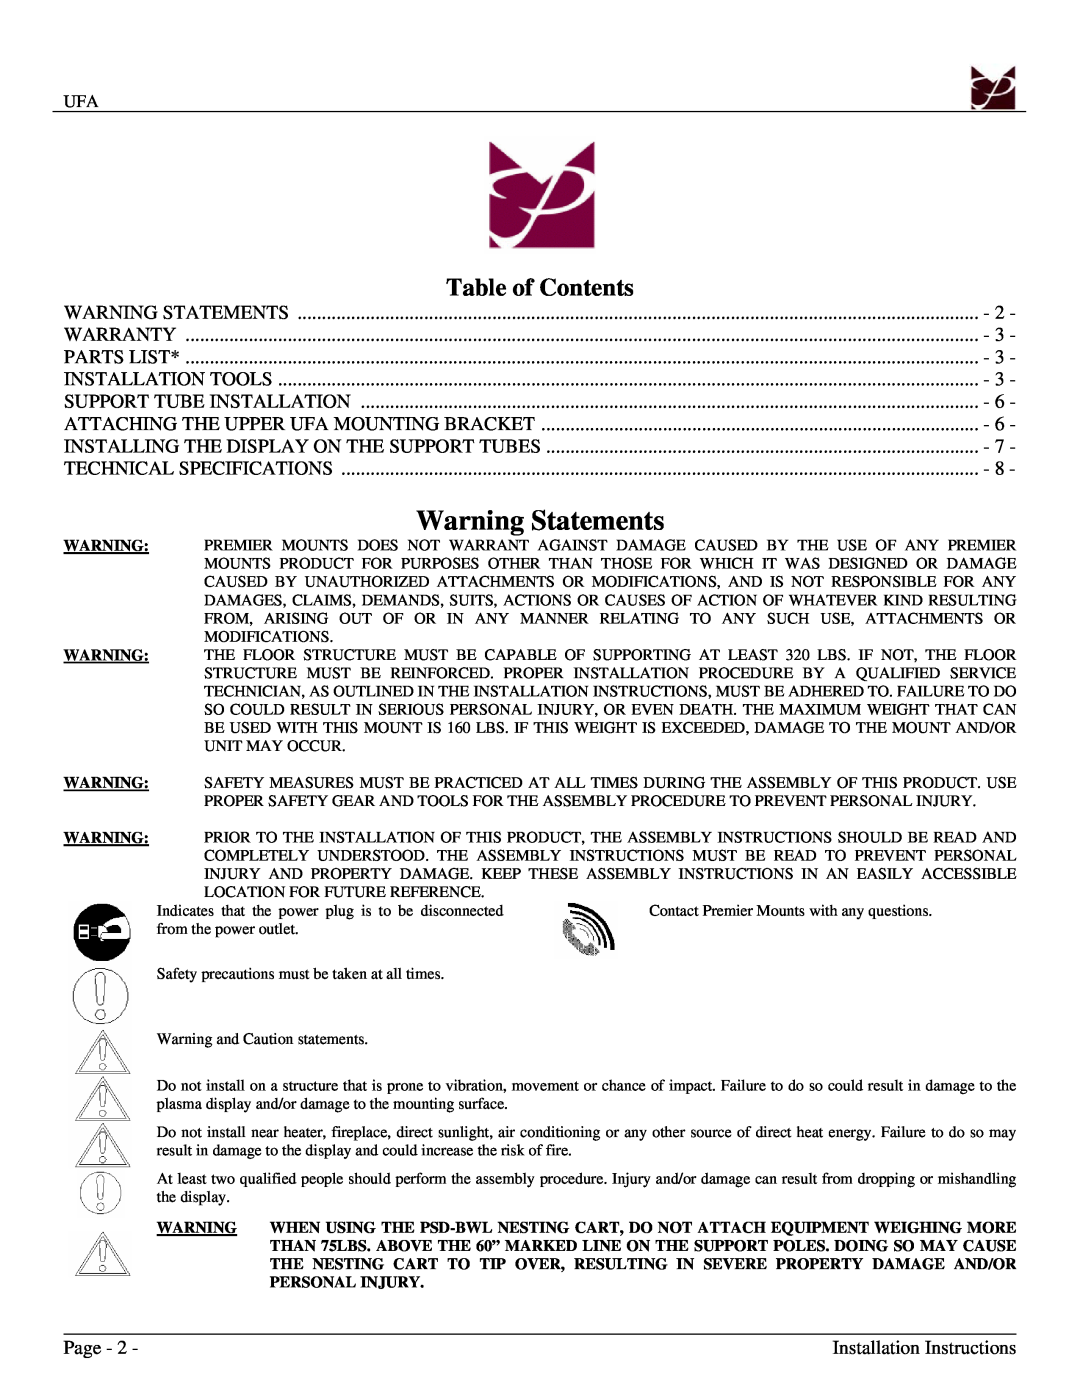 Premier Mounts UFA installation manual Warning Statements, Table of Contents 